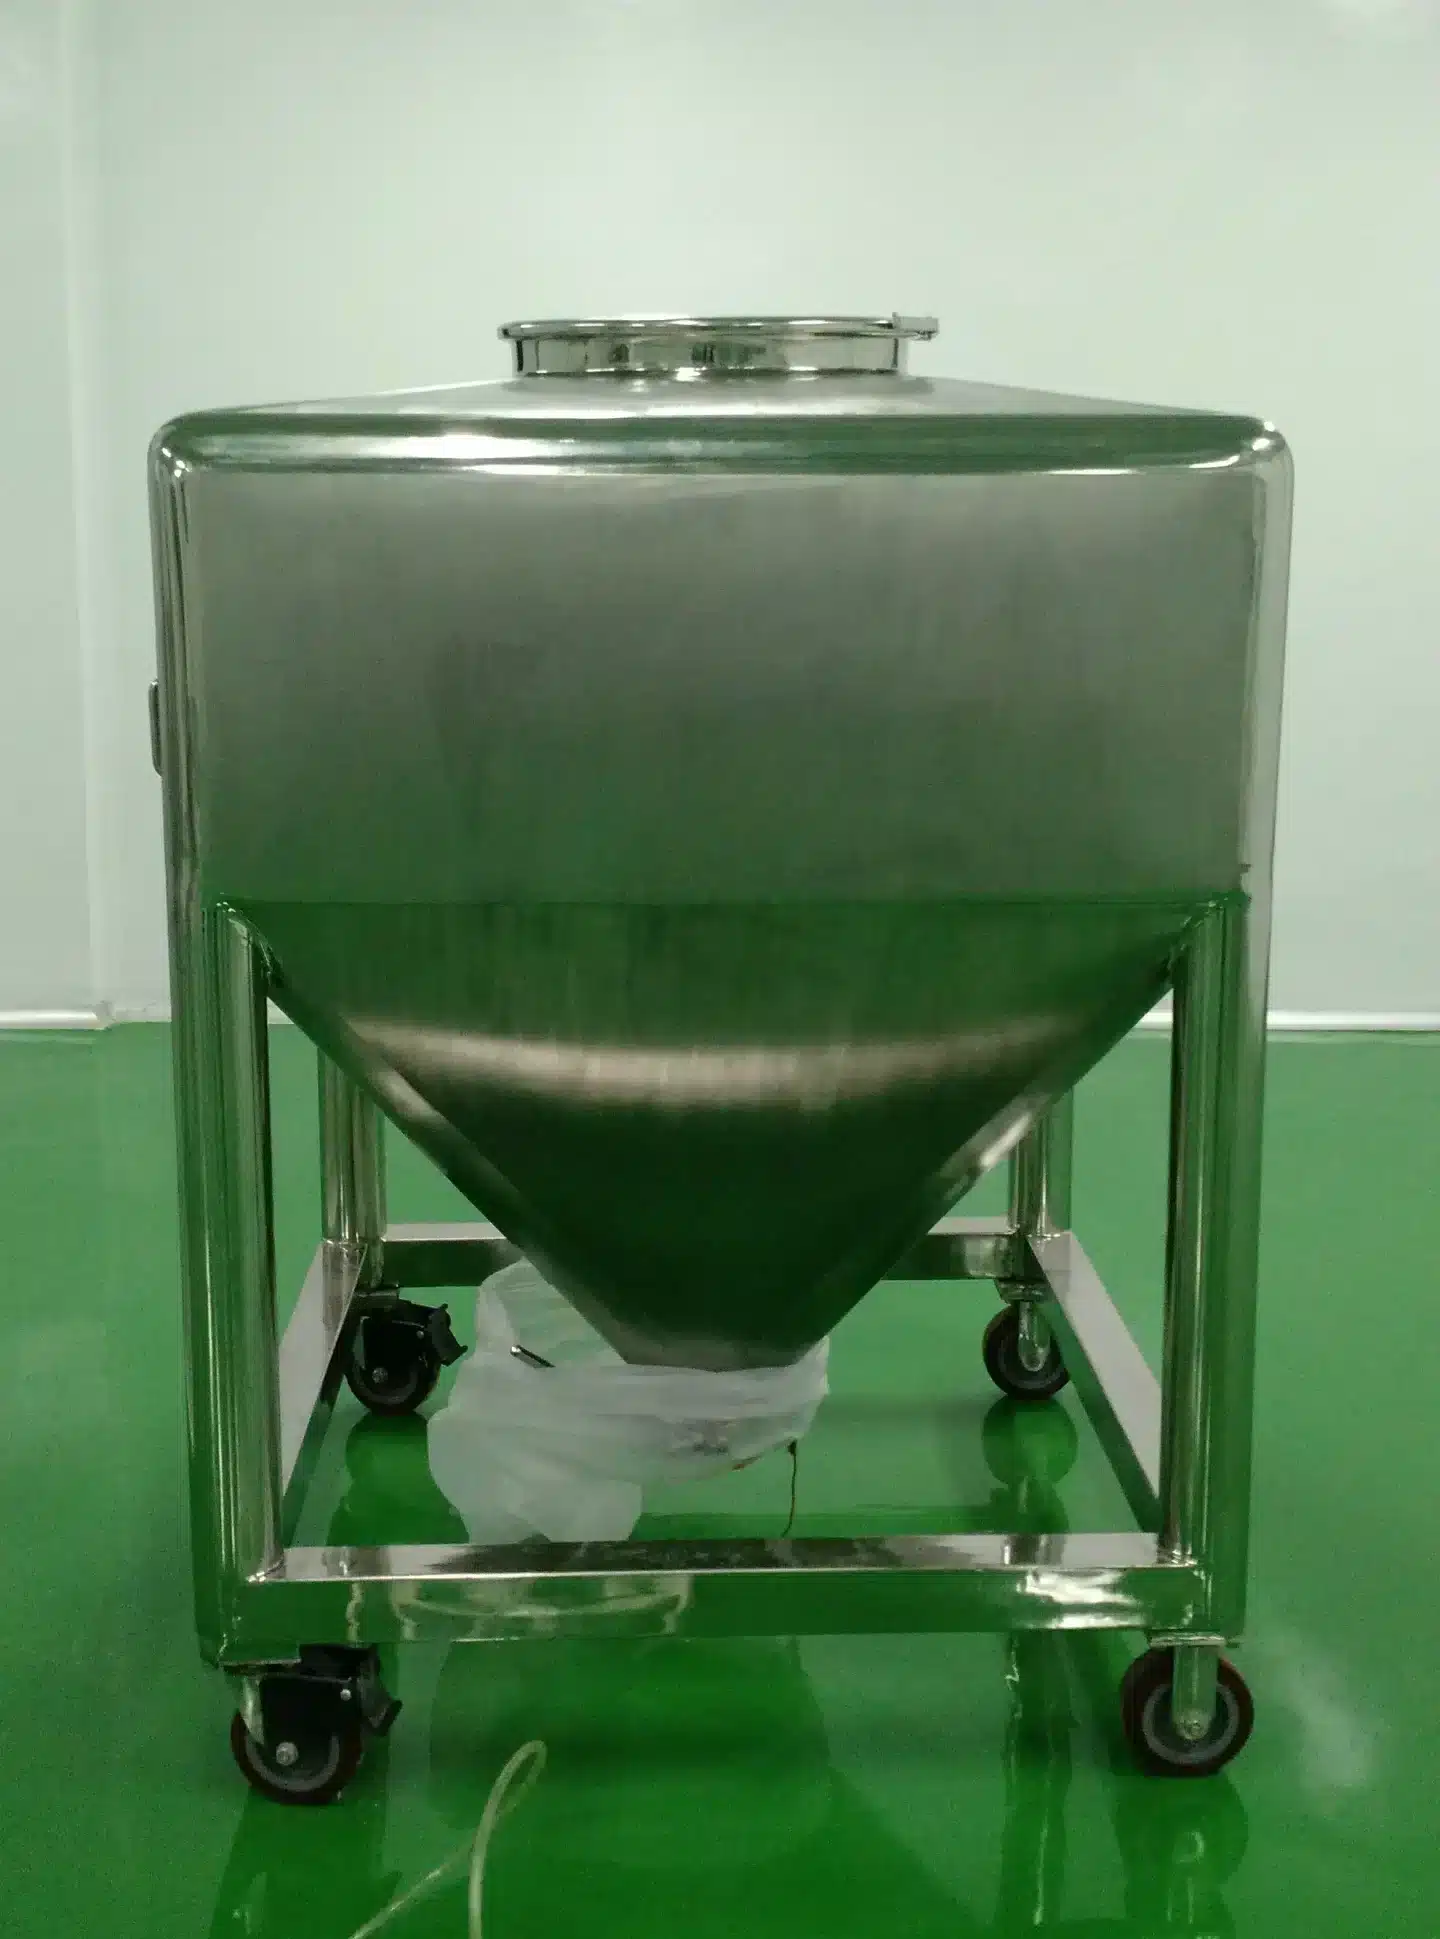 Stainless steel double cone blender mixing equipment in pharmaceutical manufacturing facility